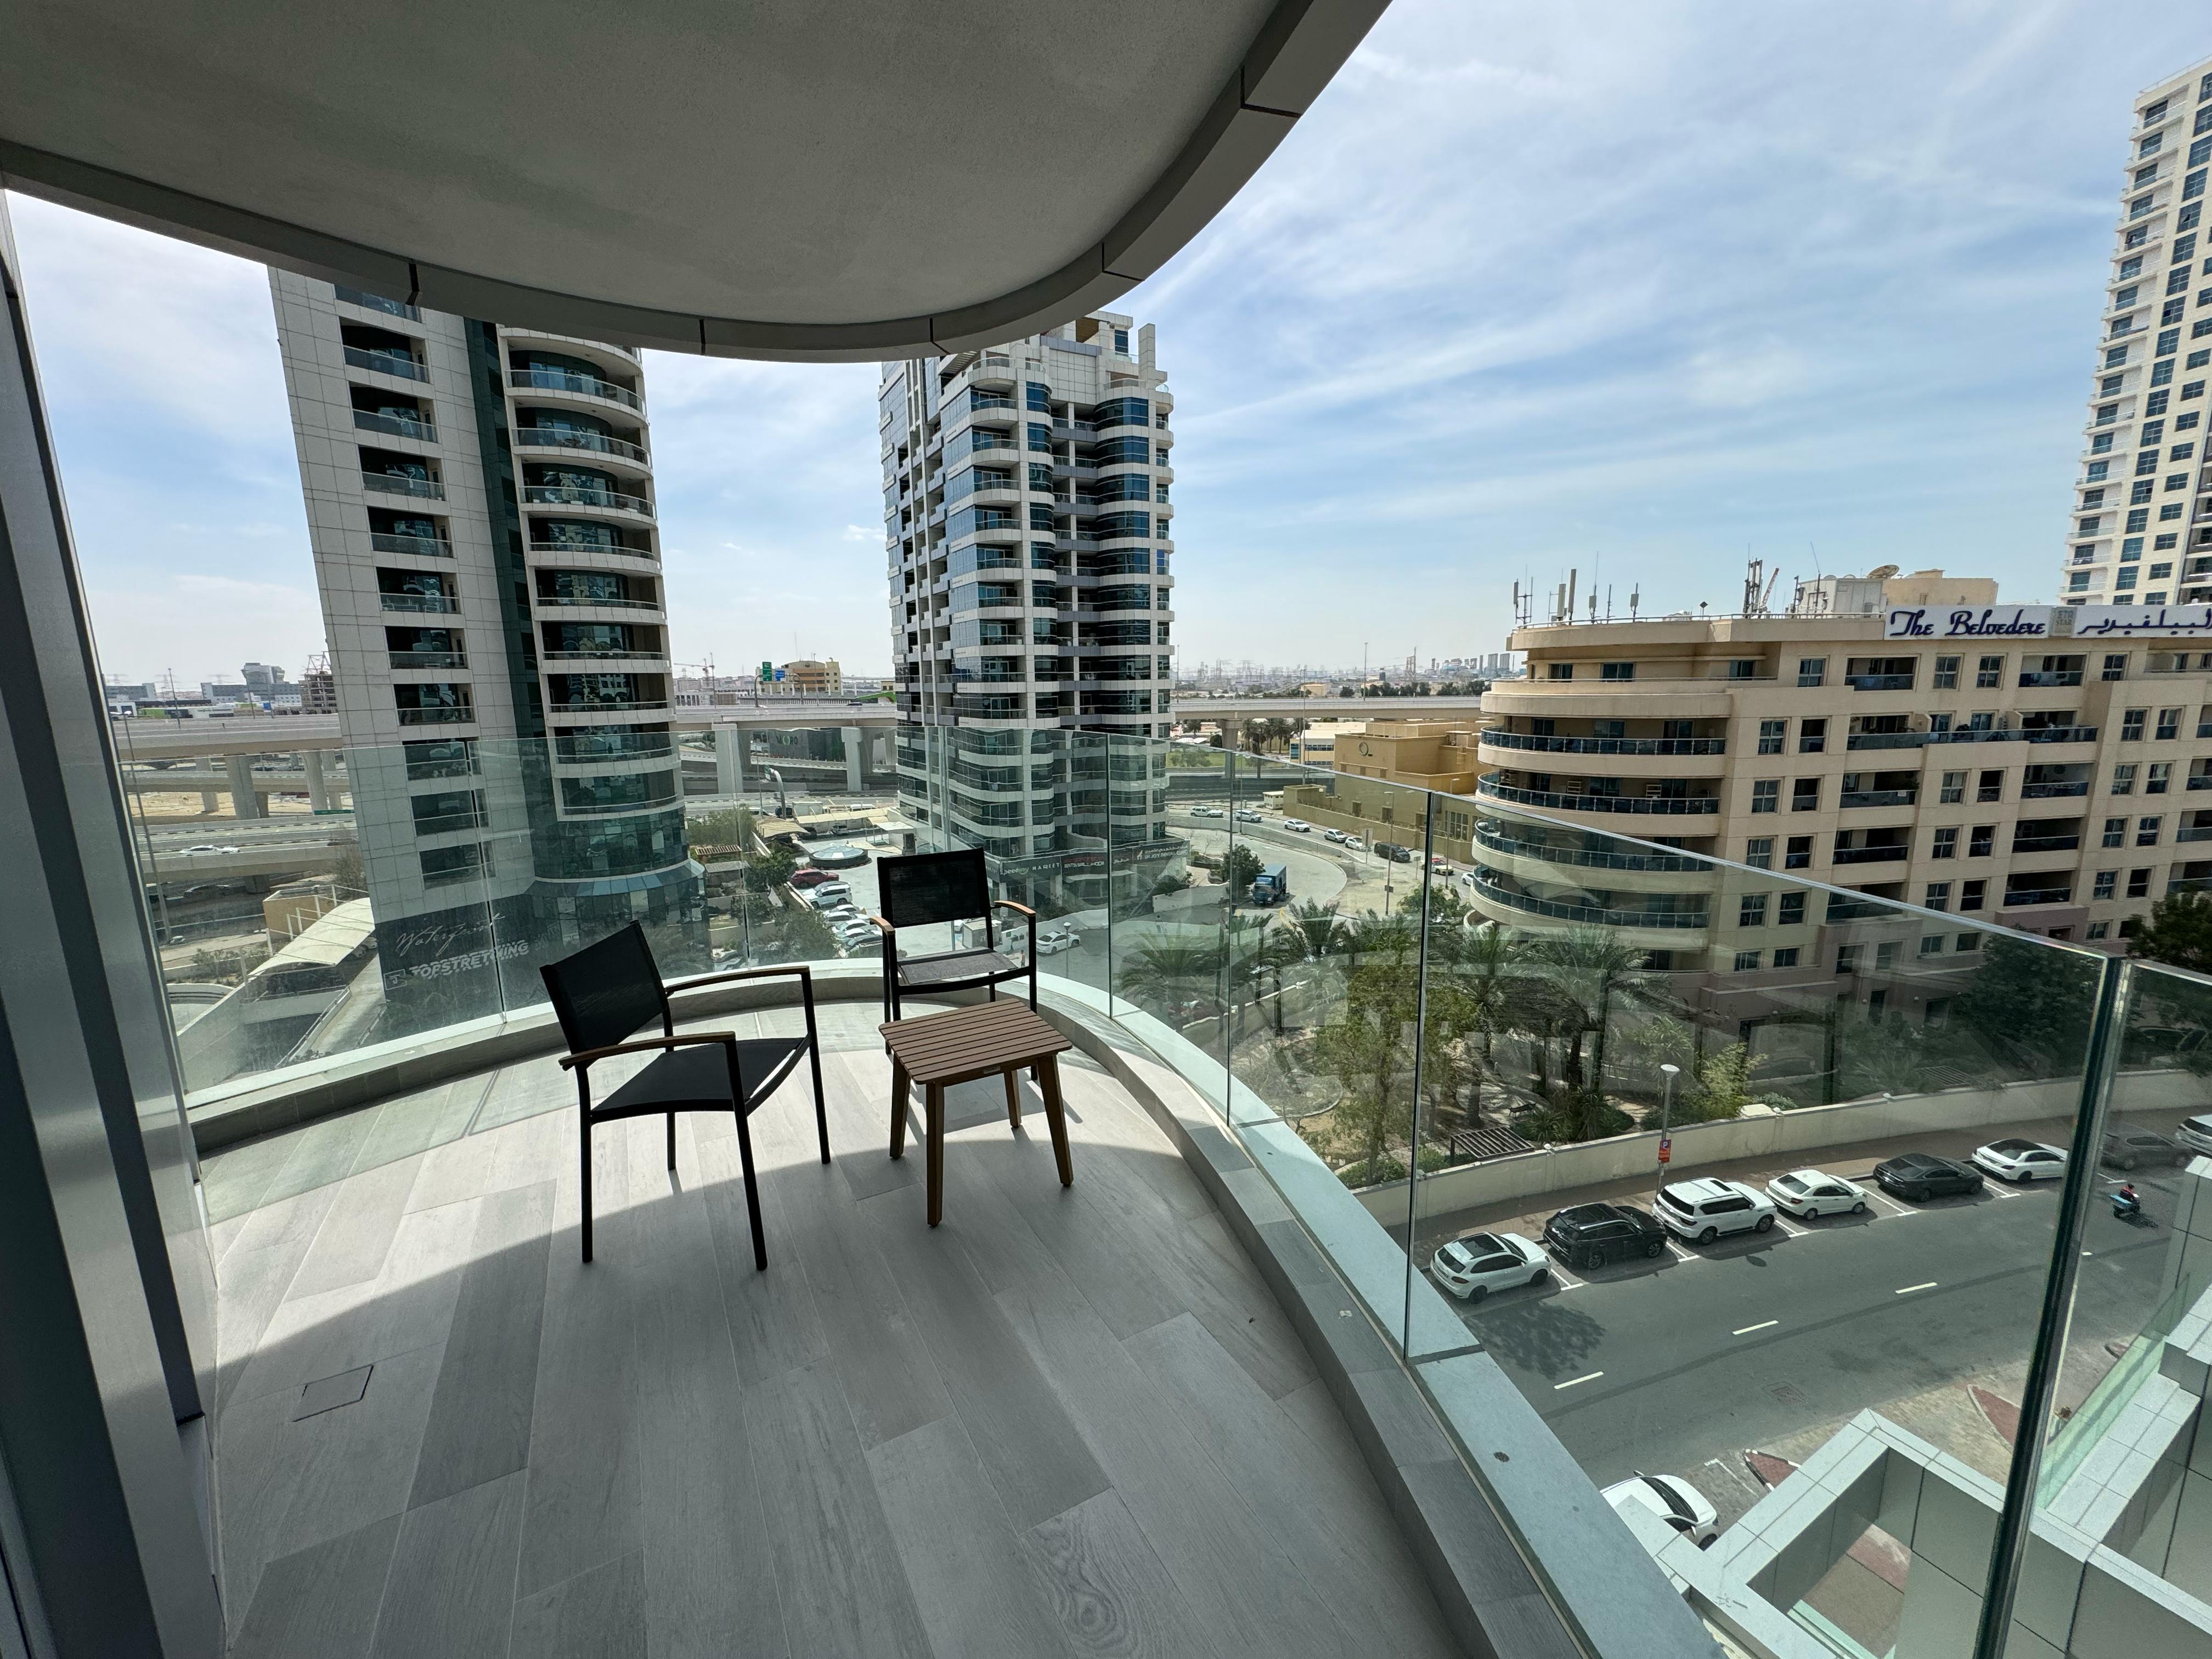 Exclusive Marina Living: Luxury 1+1 Apartment with Rooftop Pool and Spa in Dubai's Vibrant Hub